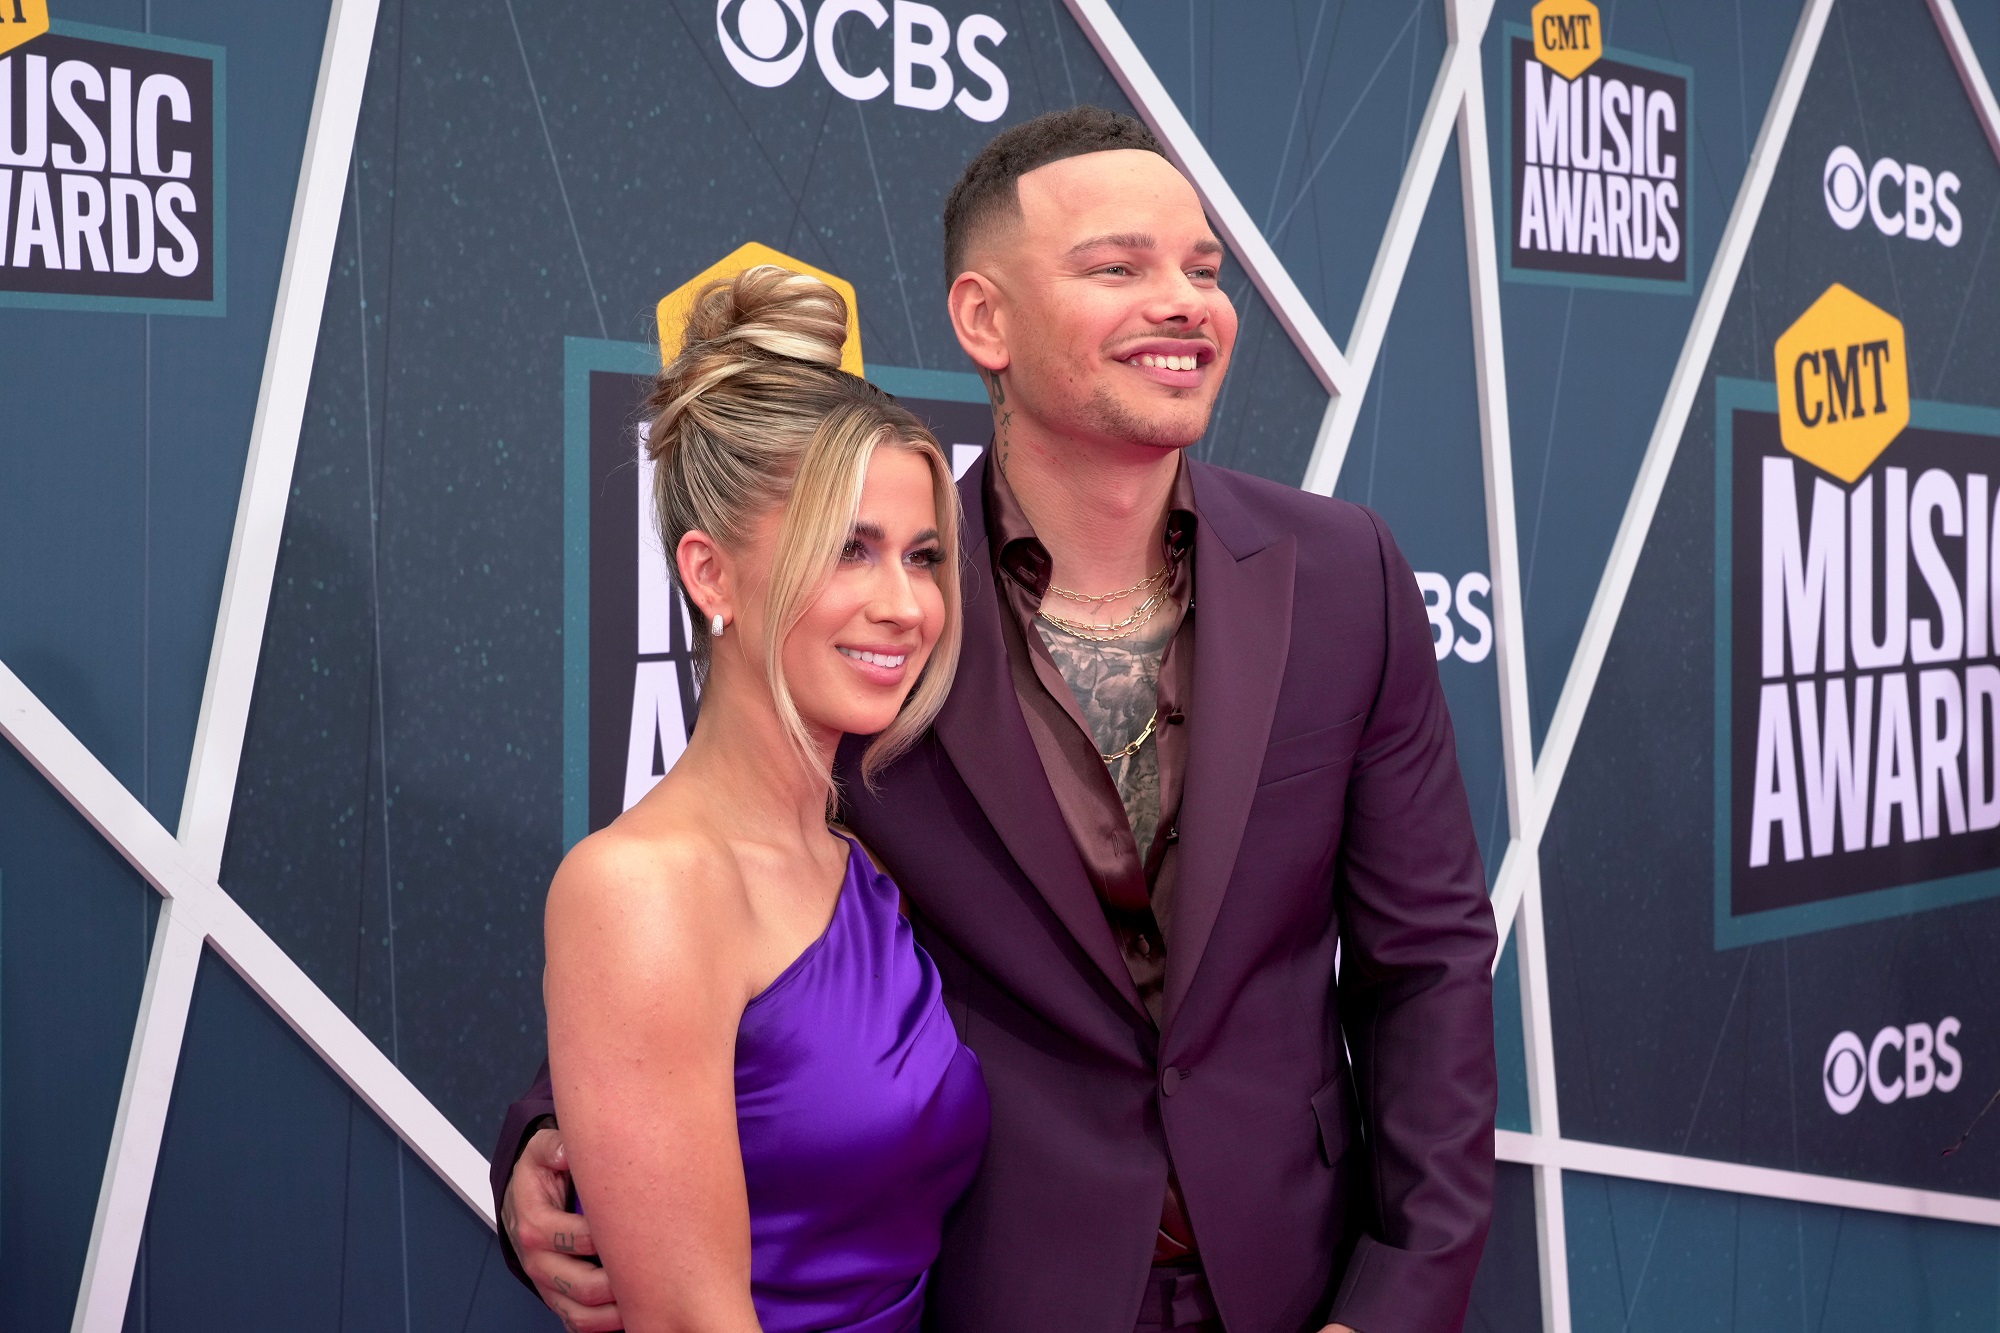 Katelyn Jae and Kane Brown attend the 2022 CMT Music Awards